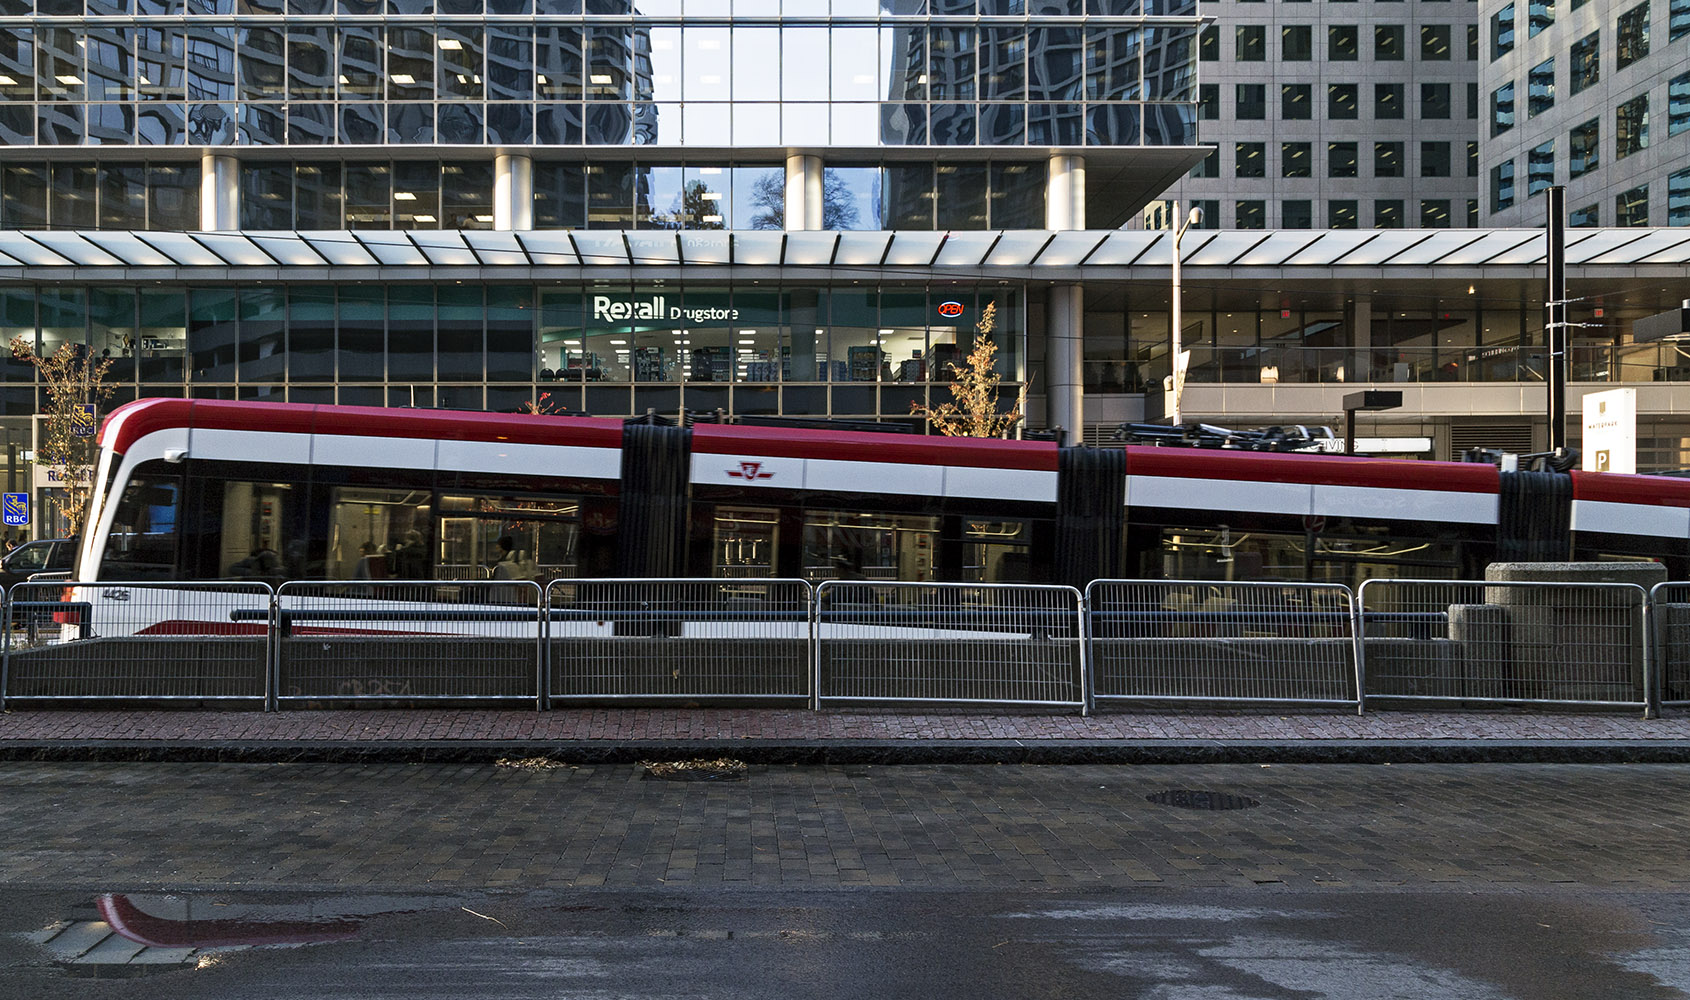 20161118. A TTC Flexity Outlook LRV rises from the underground.